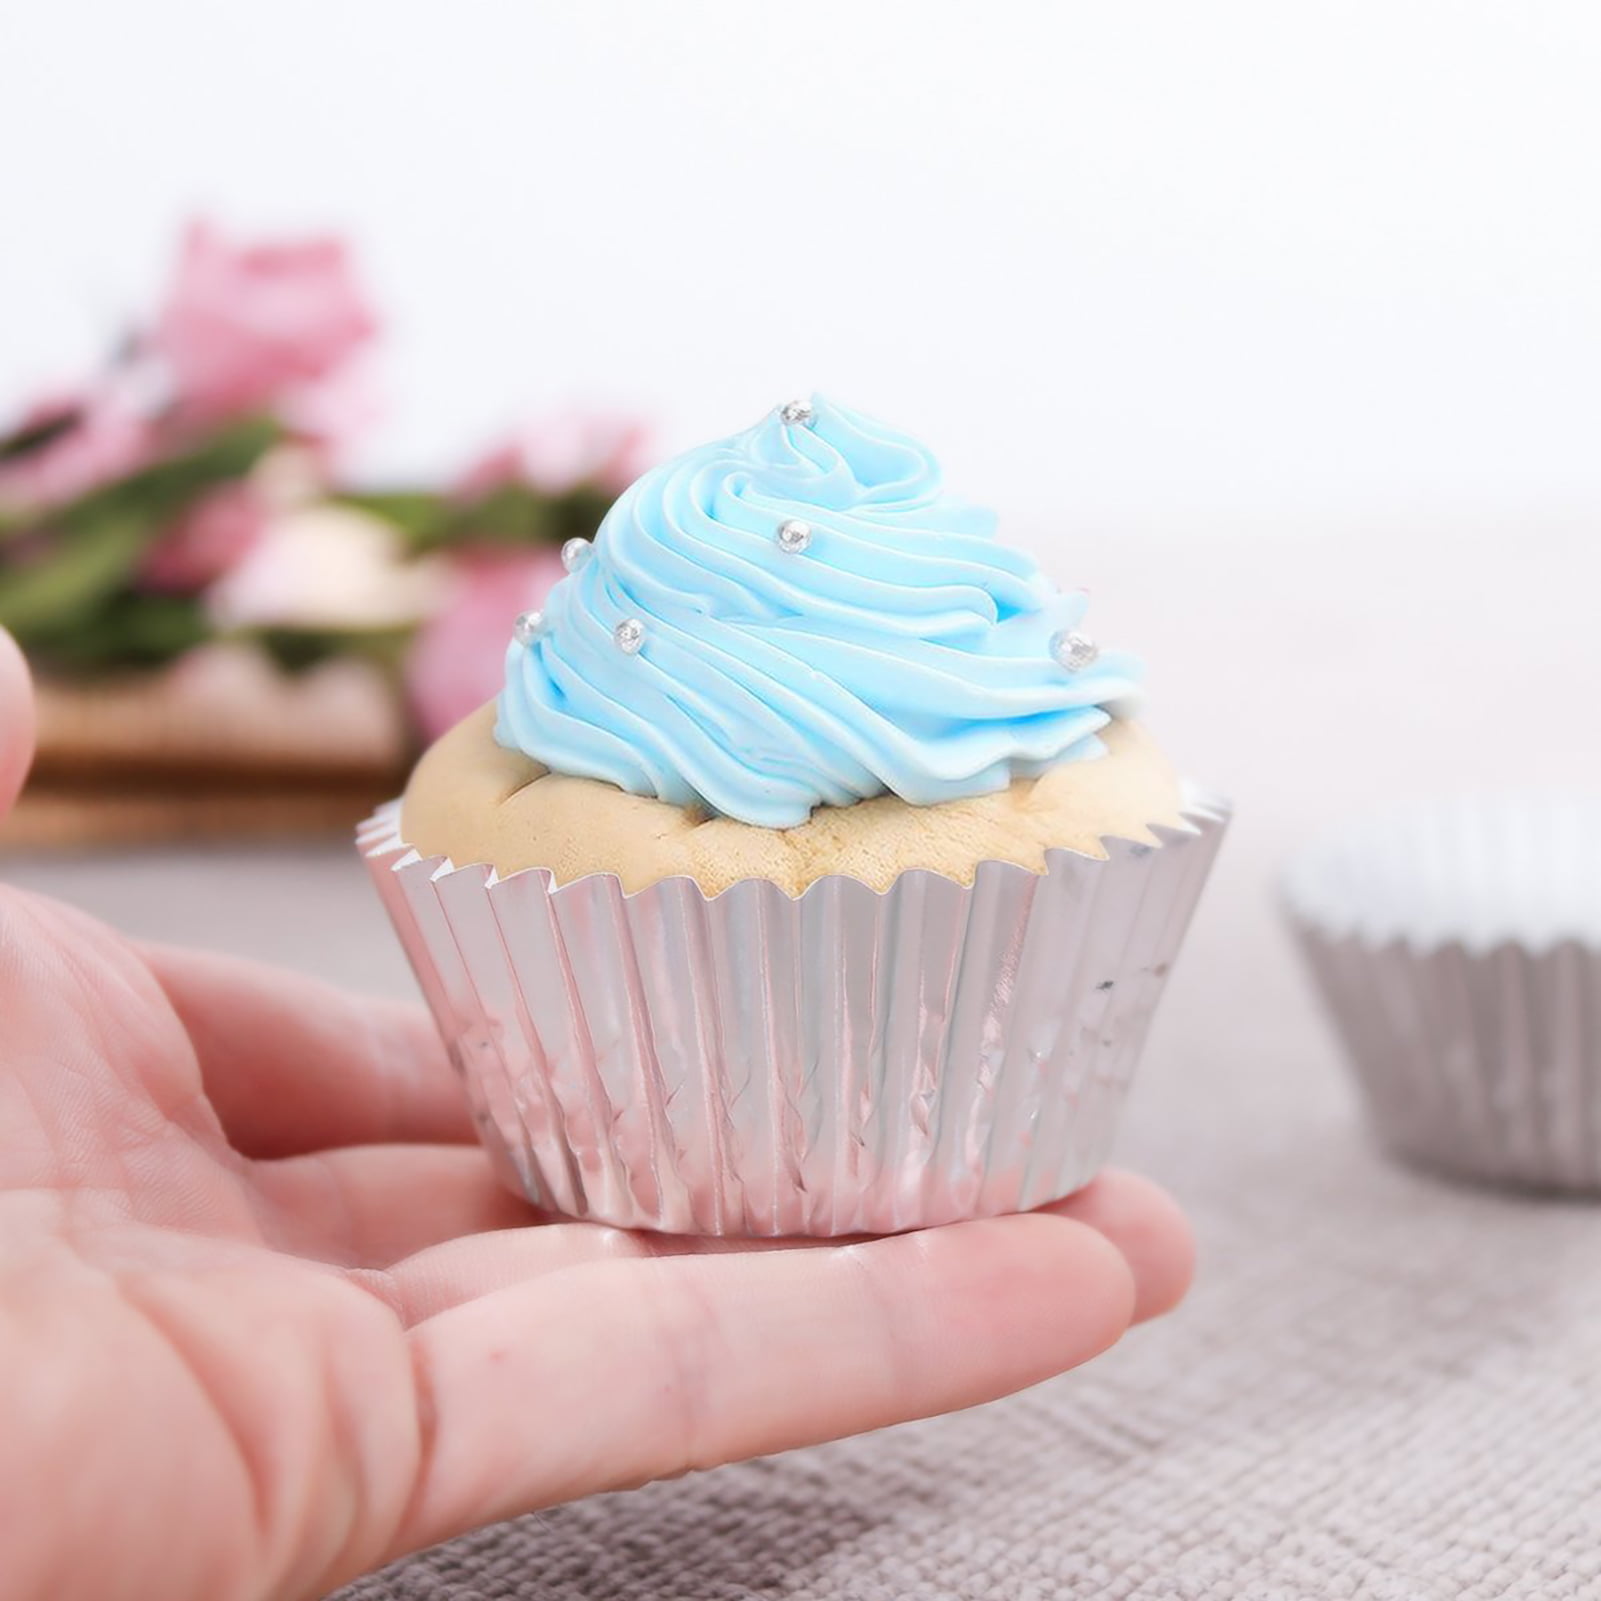 Cupcake Liners Light Blue,GOLF 100Pcs Standard Size Light Blue Foil Cupcake  Liners Wrappers Metallic Baking Cups ,Muffin Paper Cases